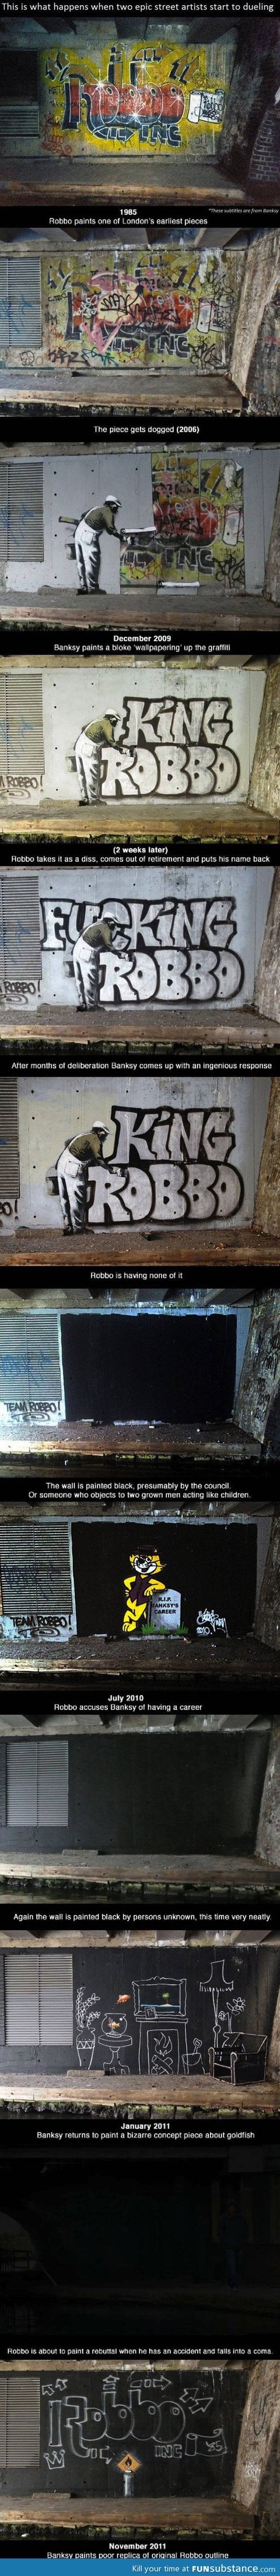 When Two Graffiti Artists Duel